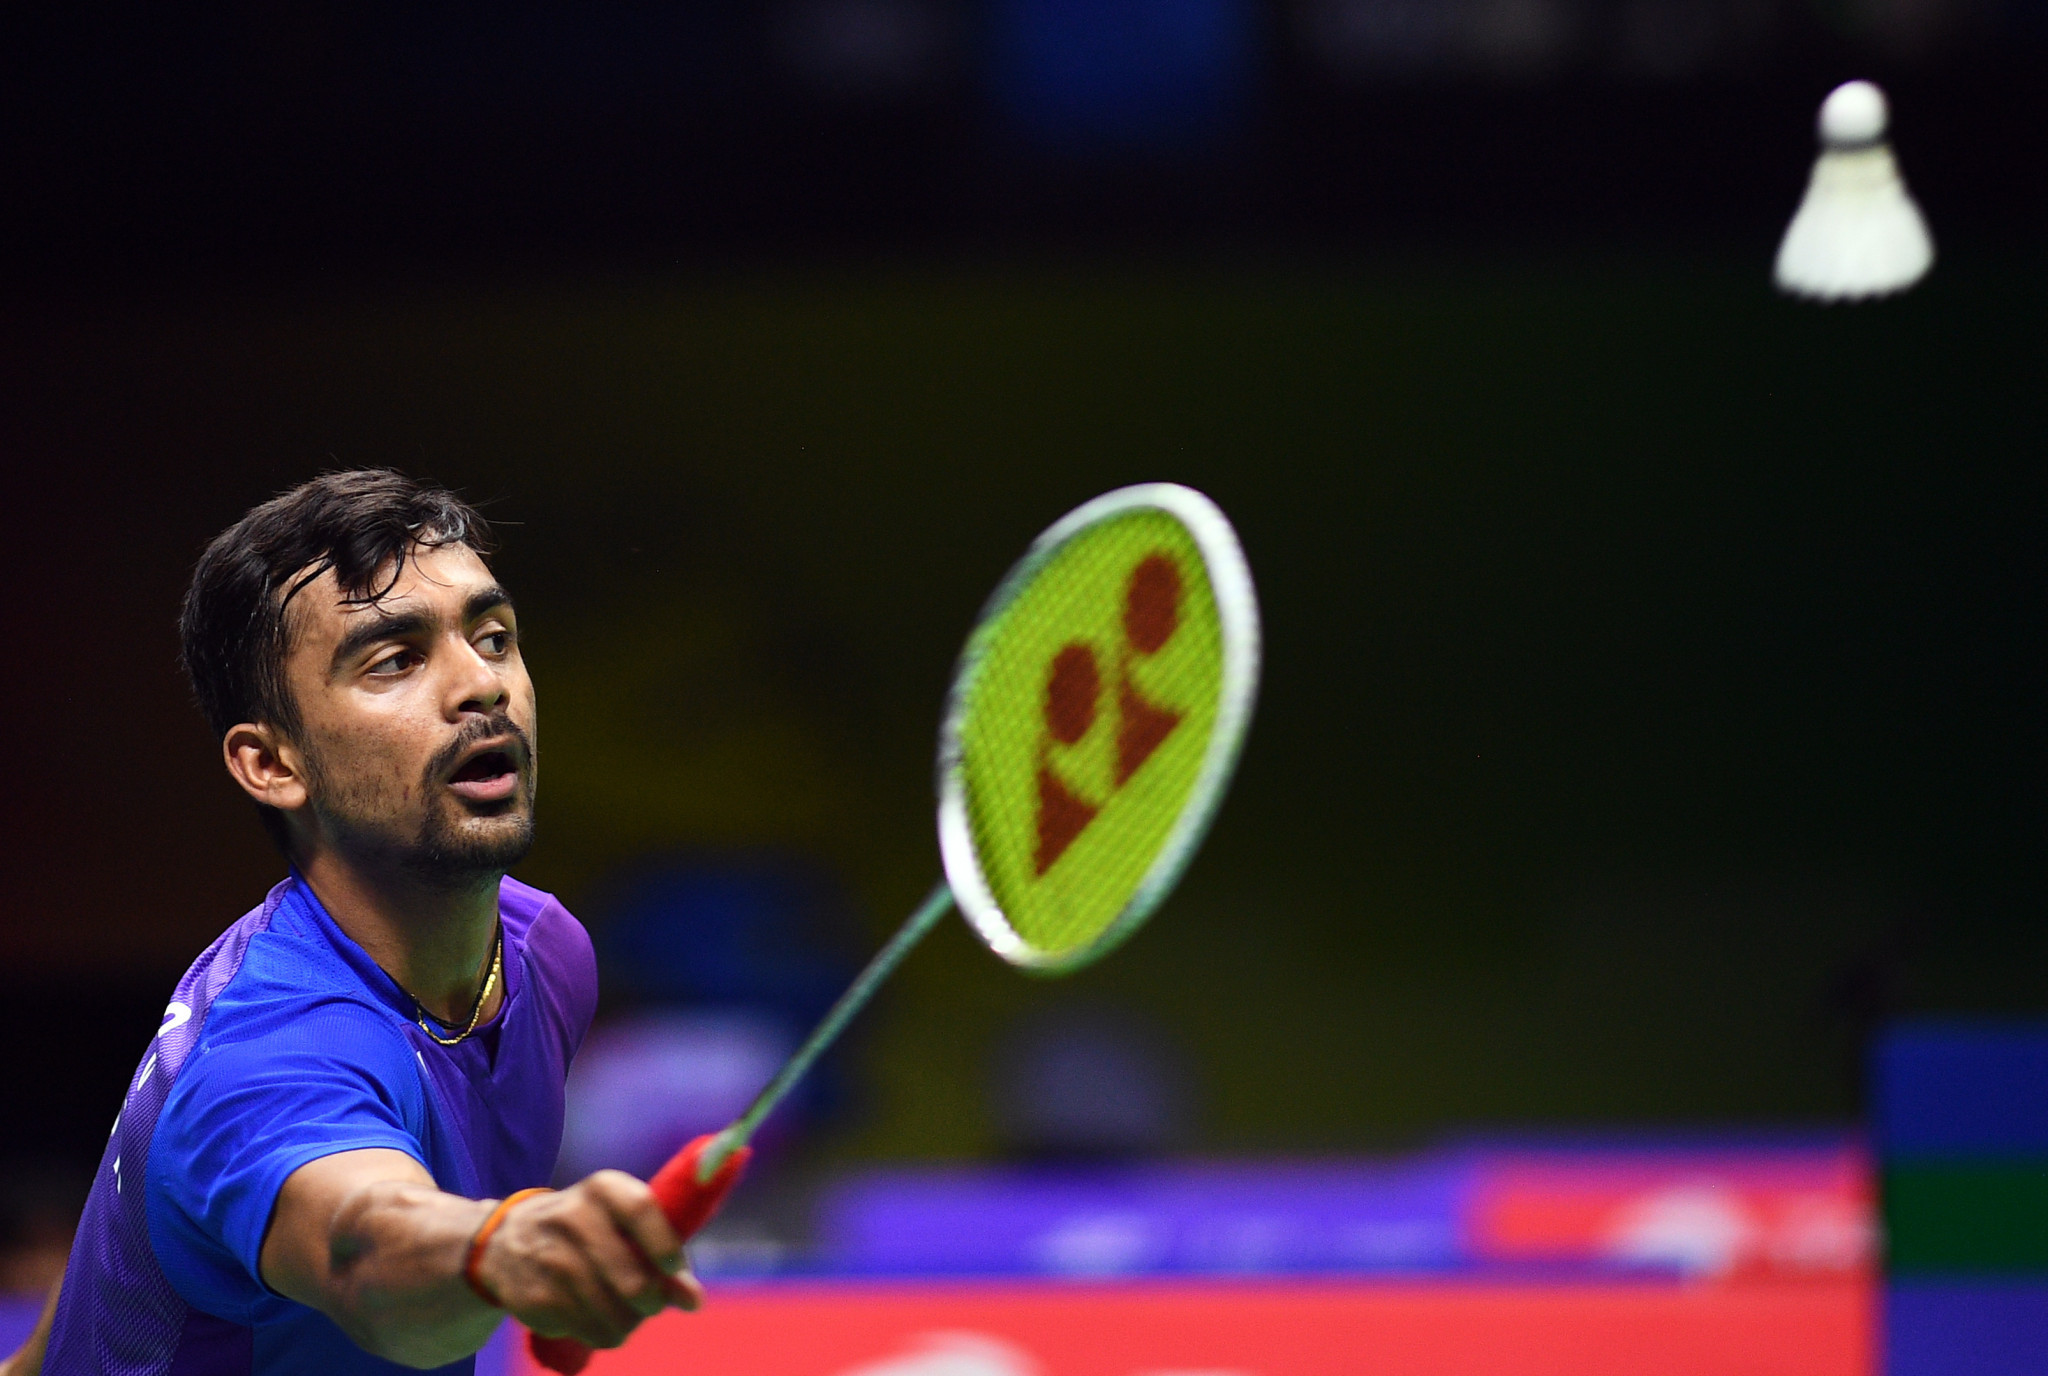 Top seed Sameer Verma will be favourite for a home Indian victory in the men's final ©Getty Images